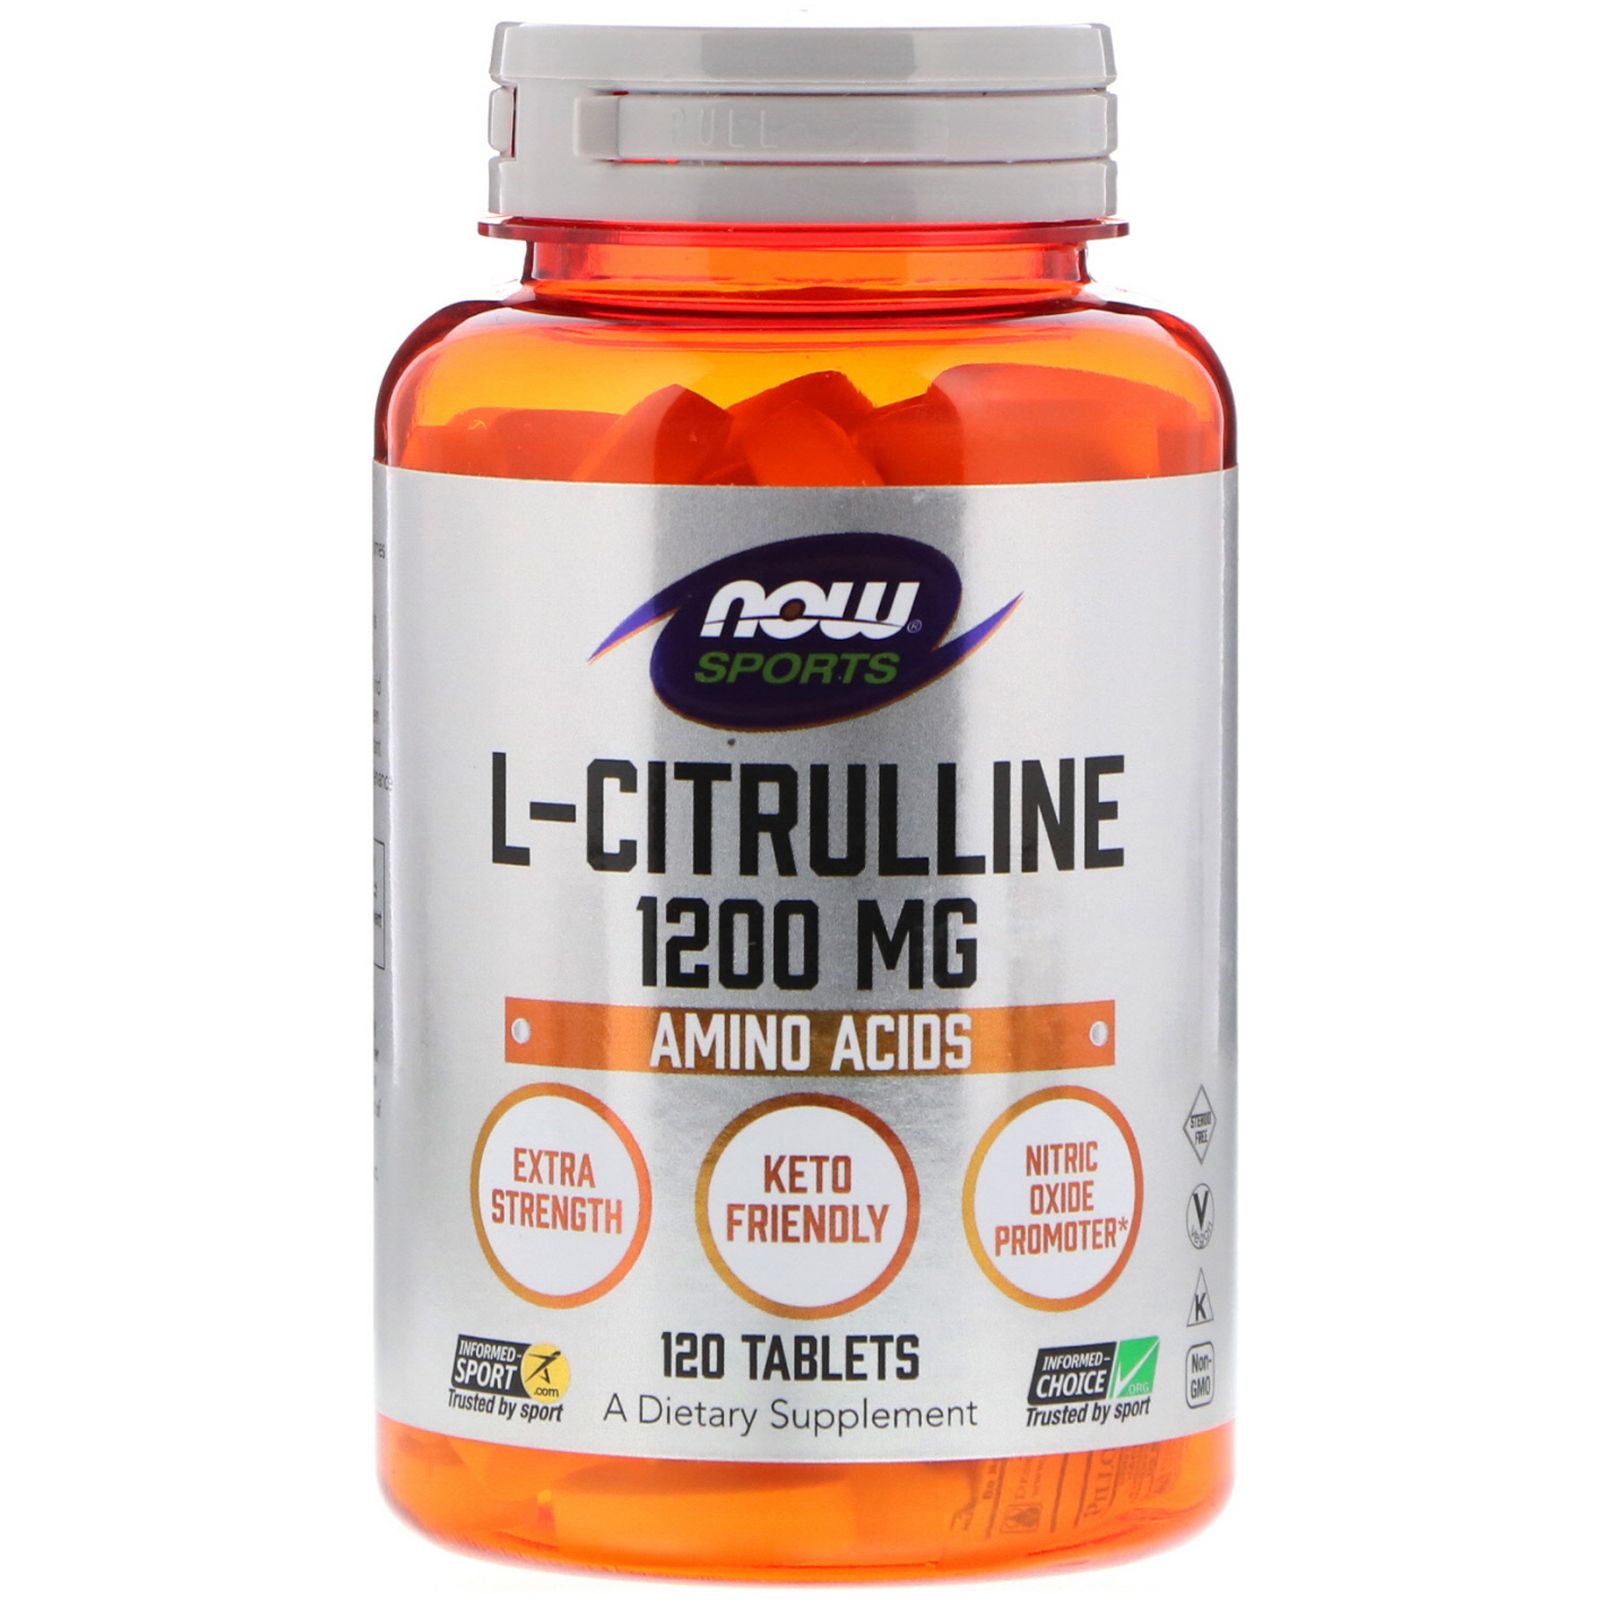 Now Foods L-Citrulline (citrulin), Extra Strength 1200 mg, 120 tablet